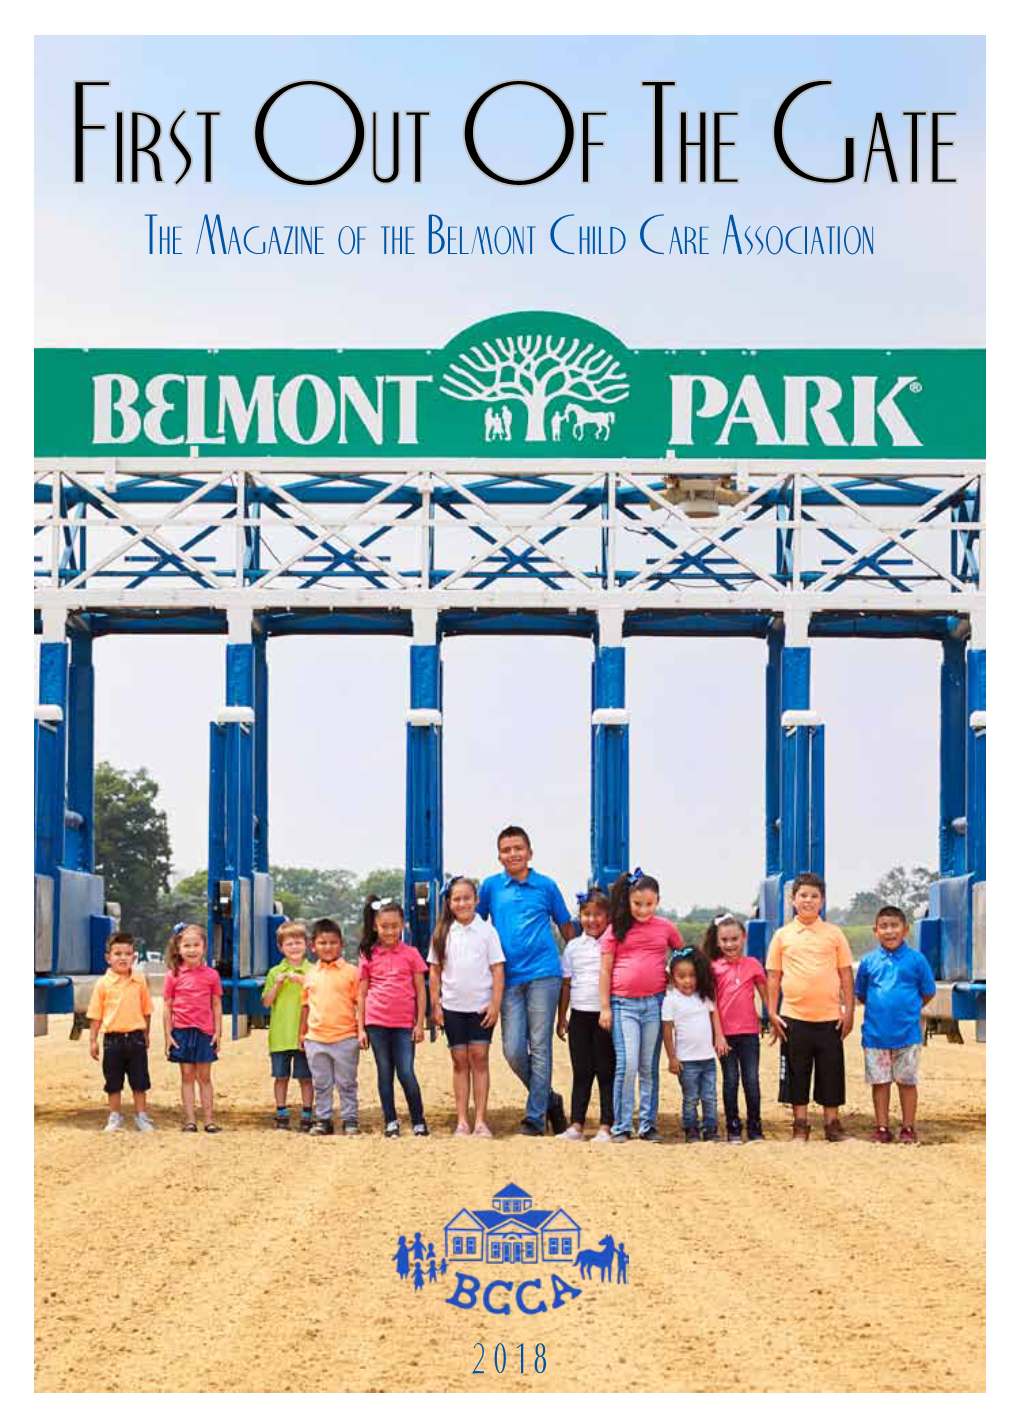 First out of the Gate the Magazine of the Belmont Child Care Association